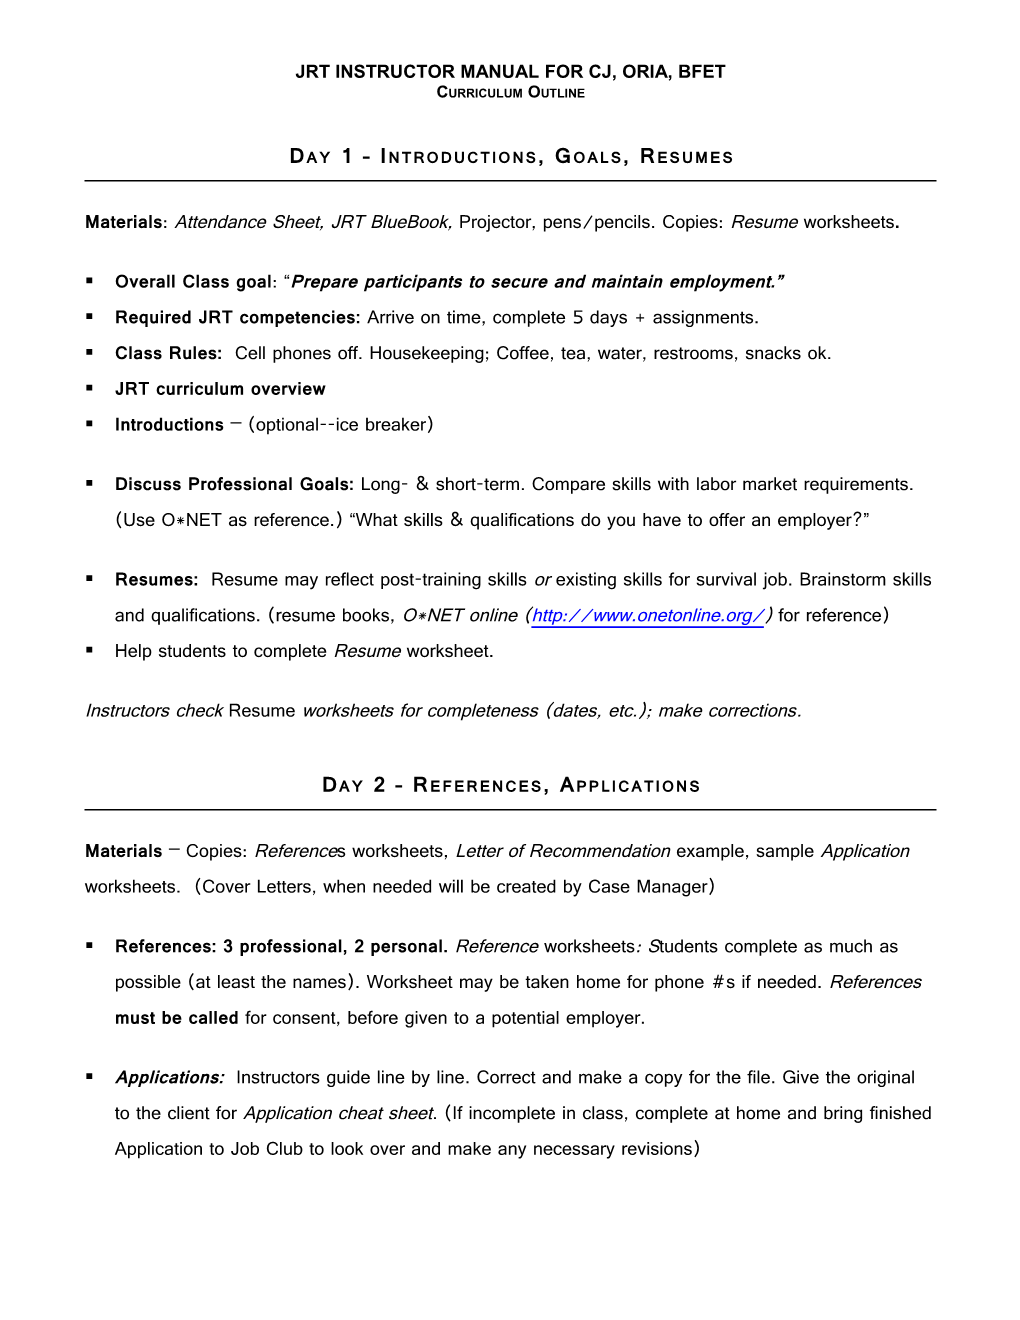 JOB READINESS Detailed Notes